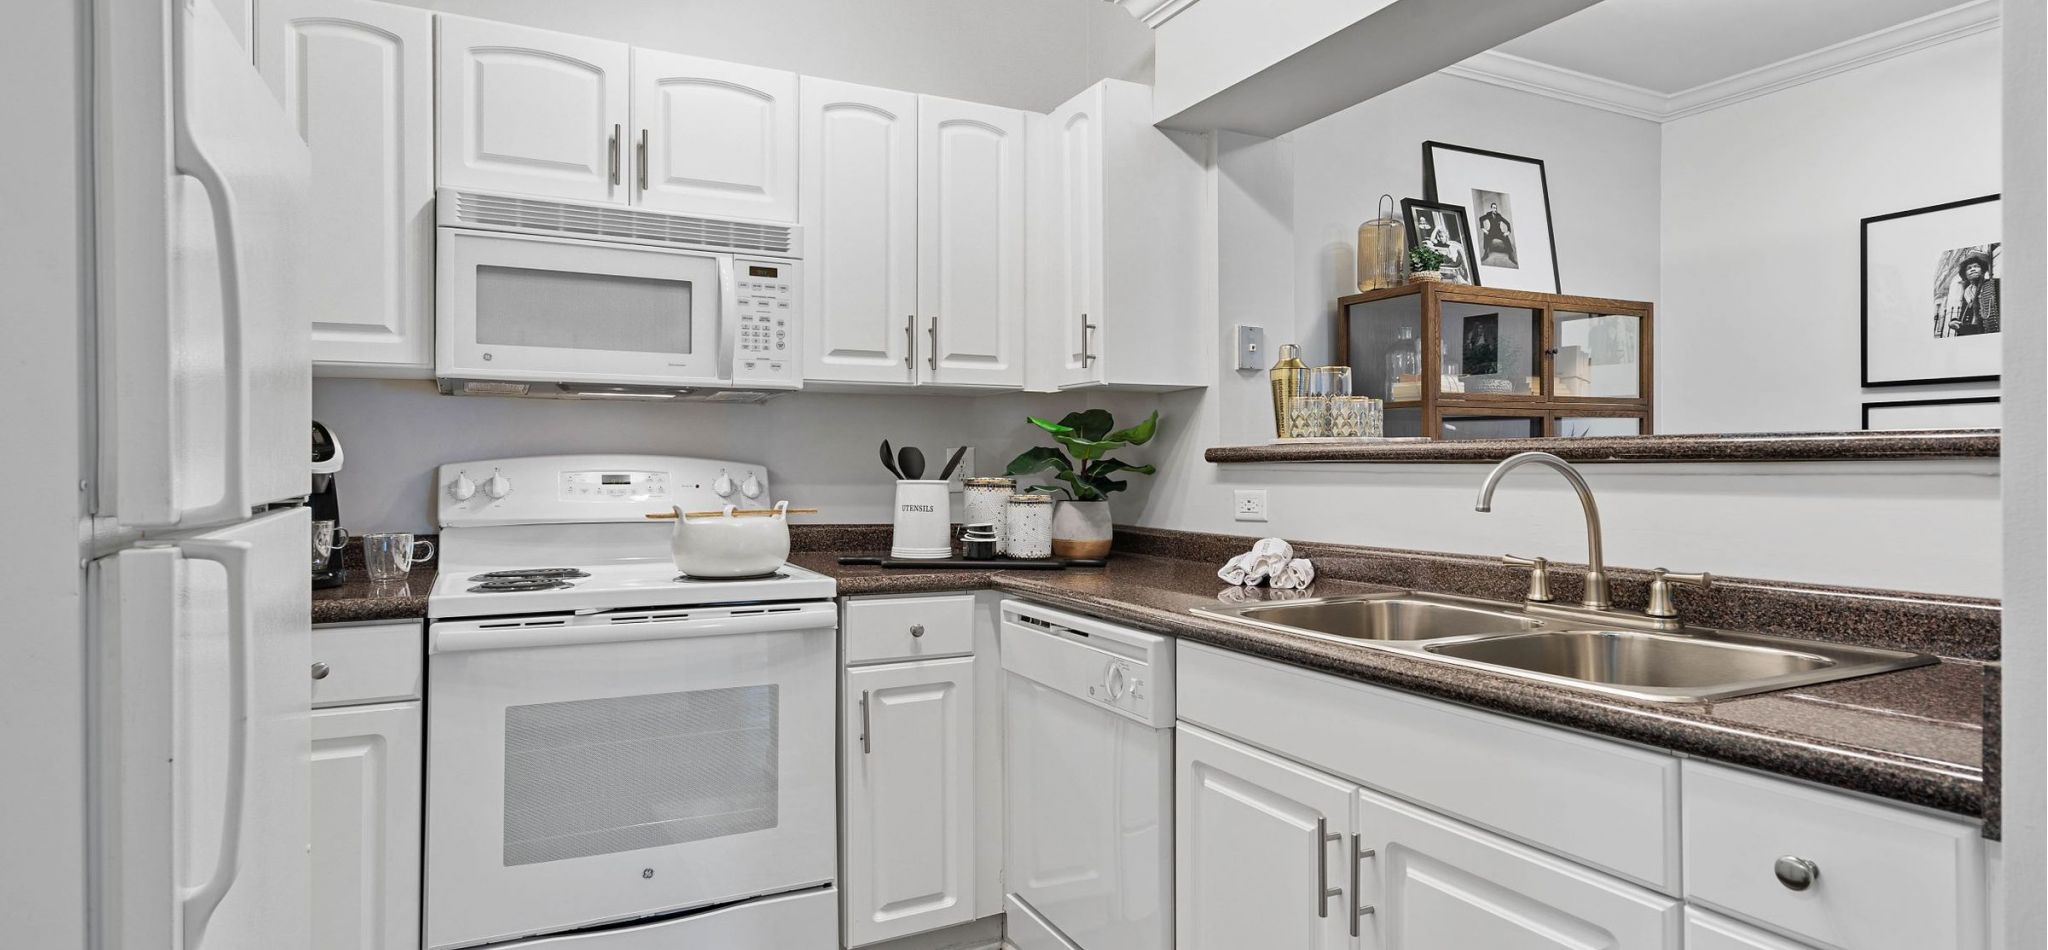 Hawthorne at the Carlyle apartment kitchen equipped with appliances and ample cabinet storage.